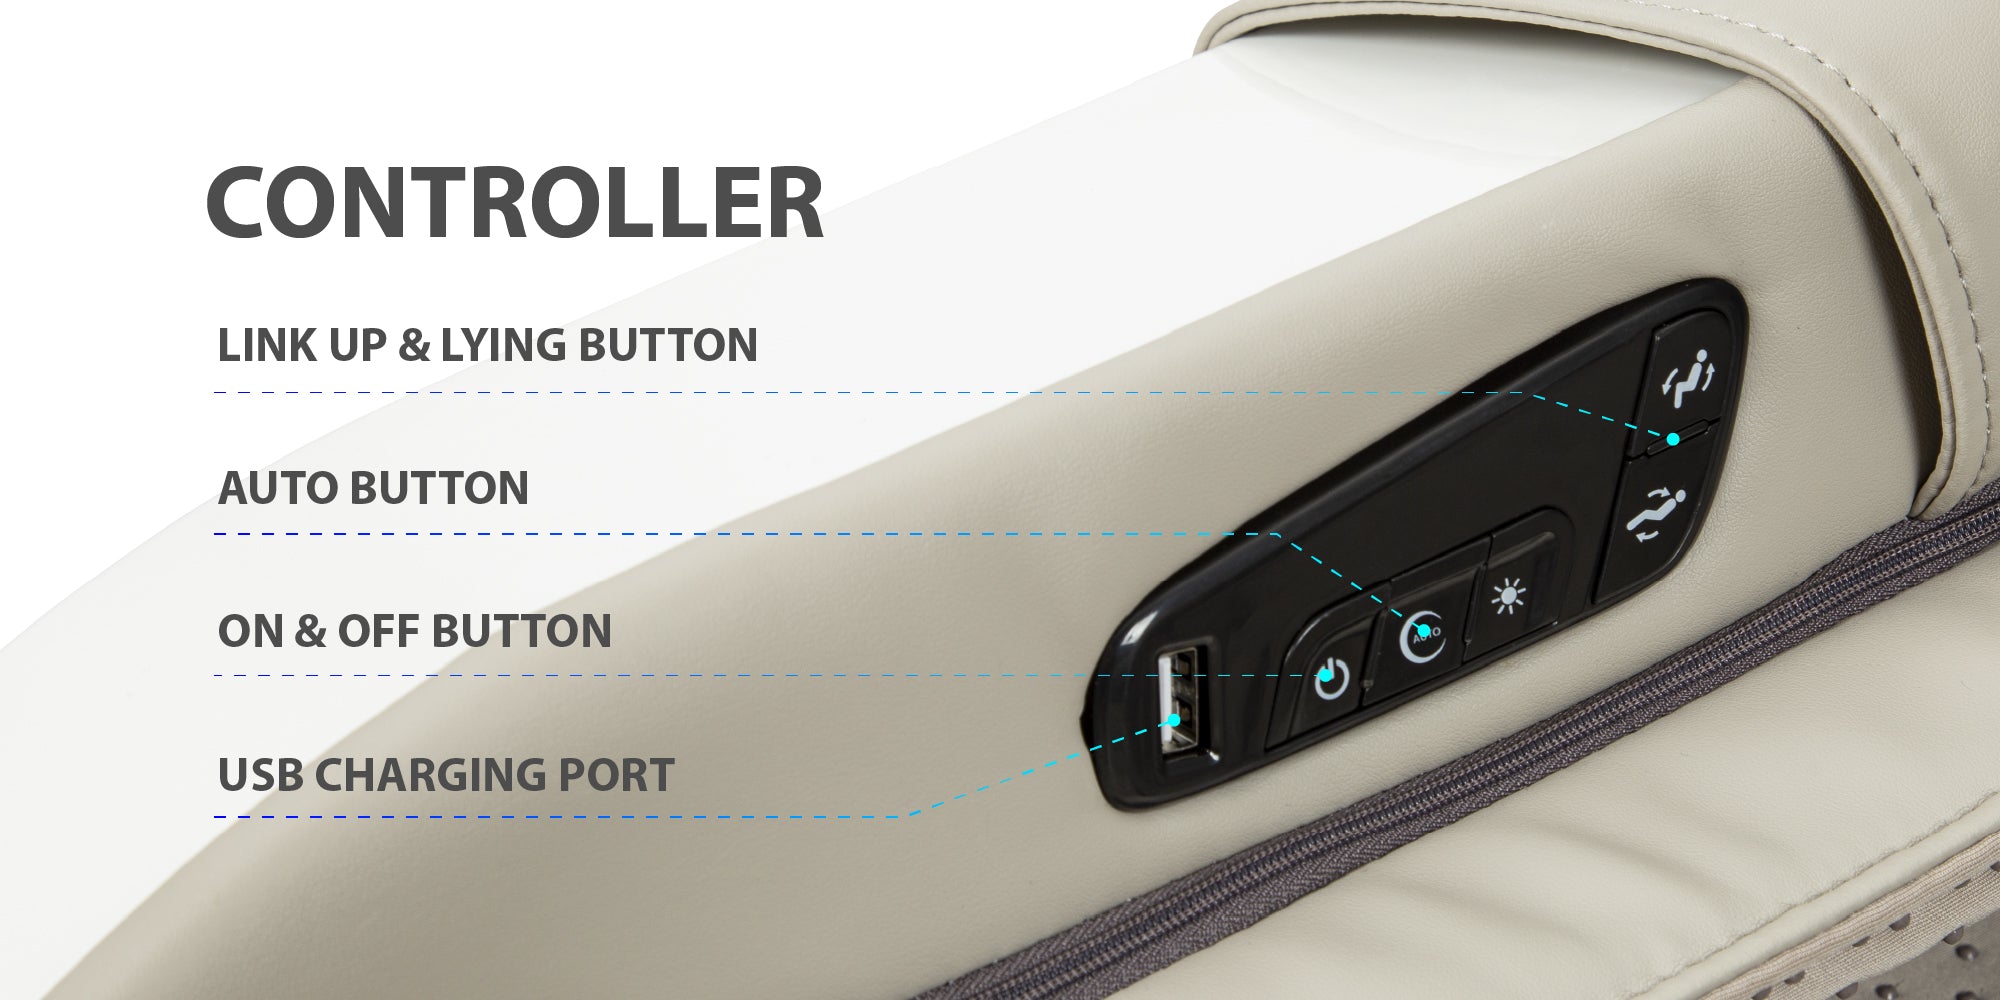 controller - link up & lying button, auto button, on&off button, usb charging port